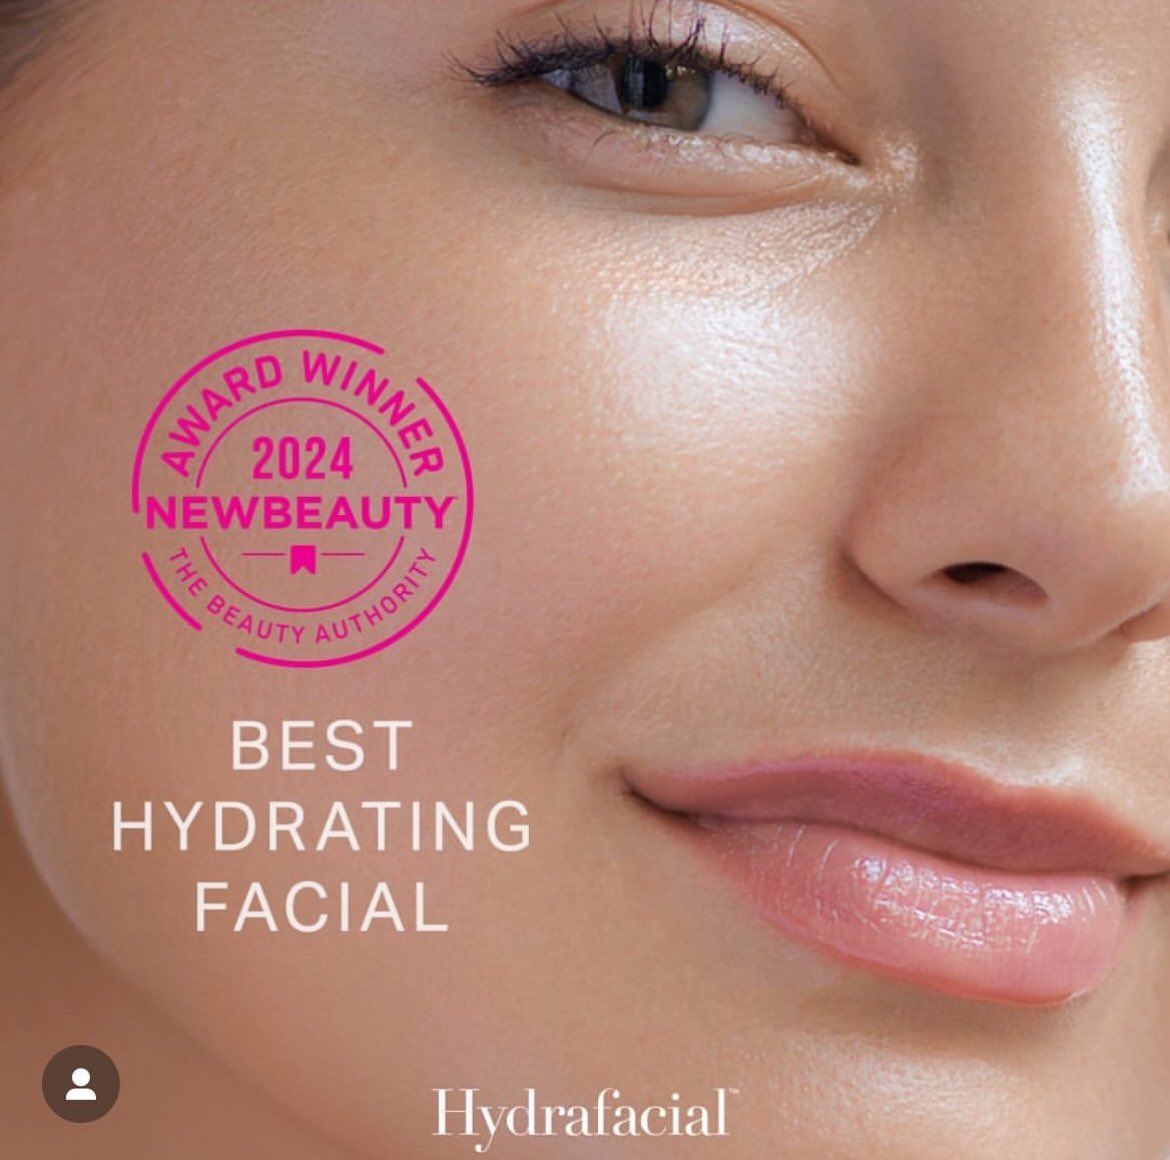 Third times a charm! * We're proud to be named New Beauty's Best Hydrating Facial for the THIRD year in a row! O
Thank you so much
@newbeauty. #hydrafacial
#selfcare #spectramedicals #healthyskin #skincare #lifestyle #luxuryskincare #luxurywellness #clinic